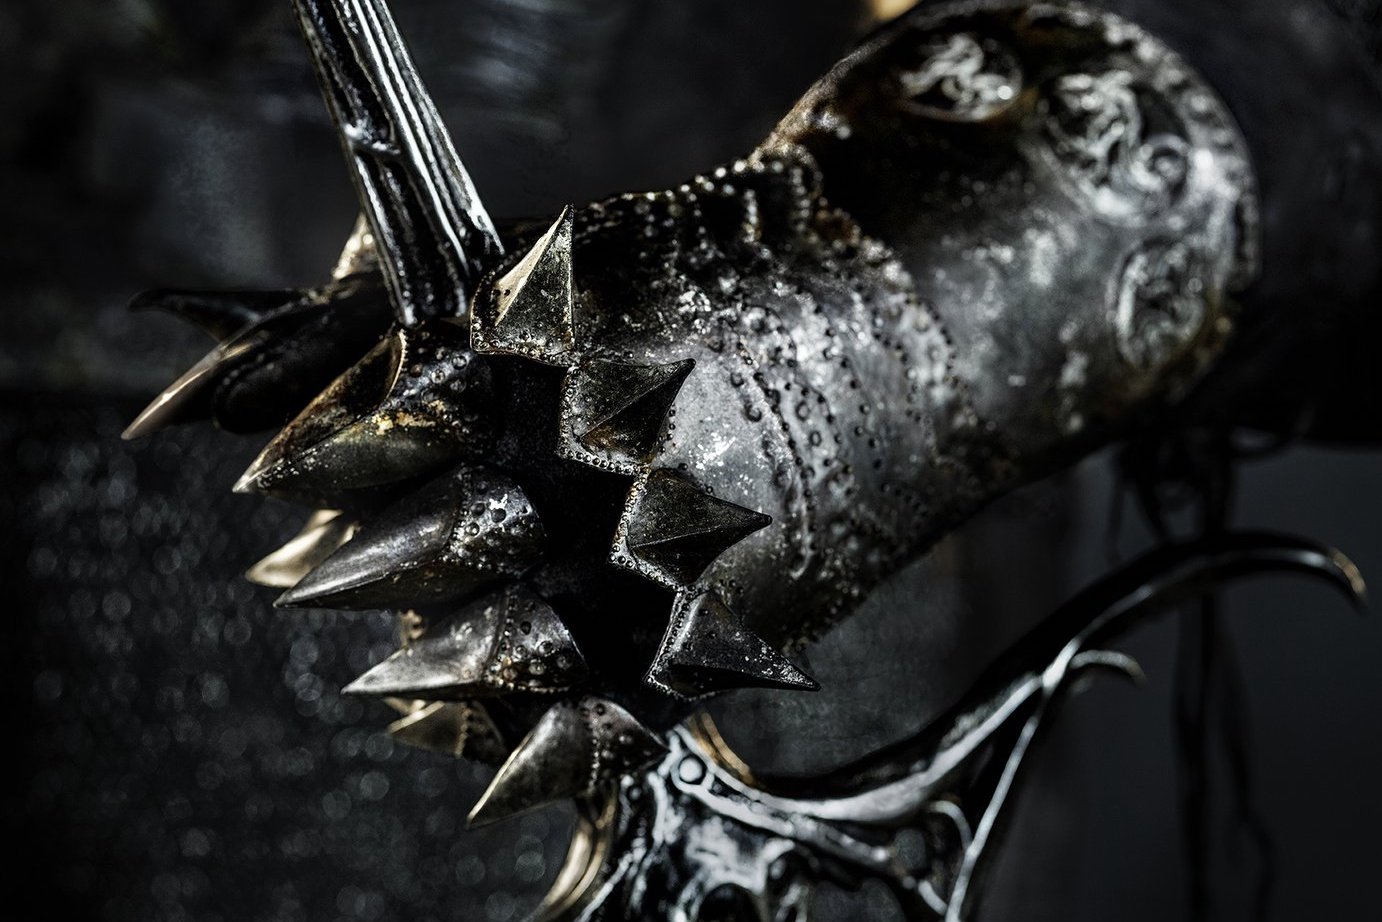 A very Sauron-like gauntlet grips the hilt of a weapon in a character poster for The Lord of the Rings: The Rings of Power.